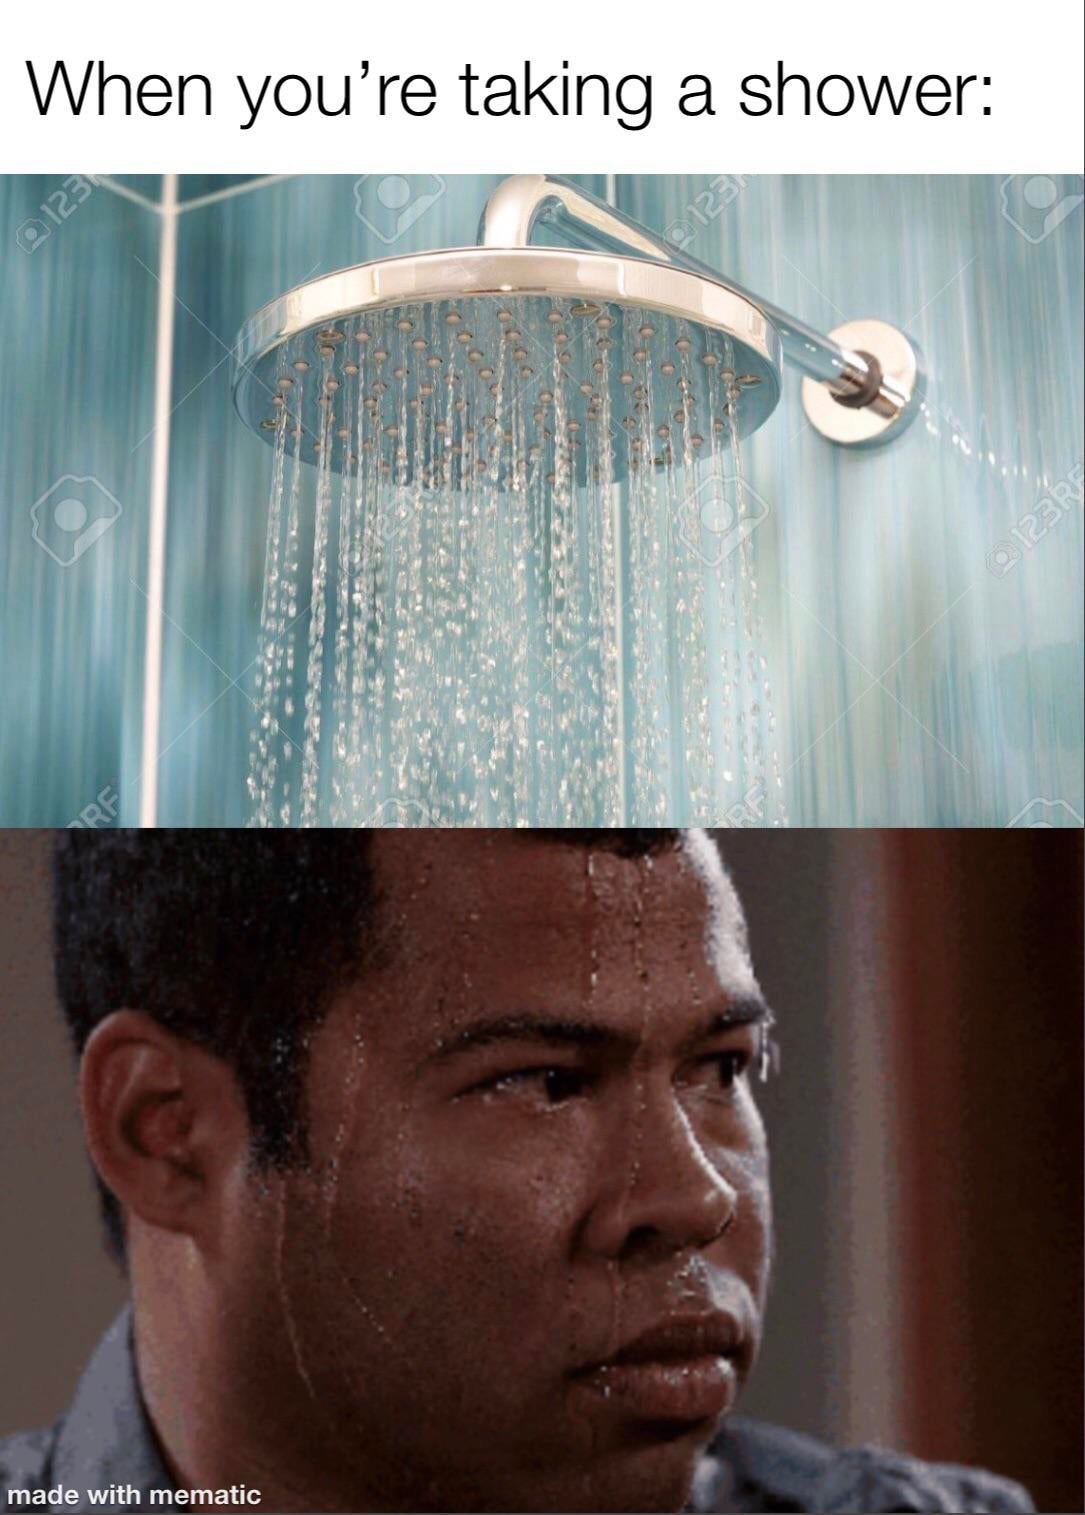 jordan peele sweating meme - When you're taking a shower 123 2123RE made with mematic